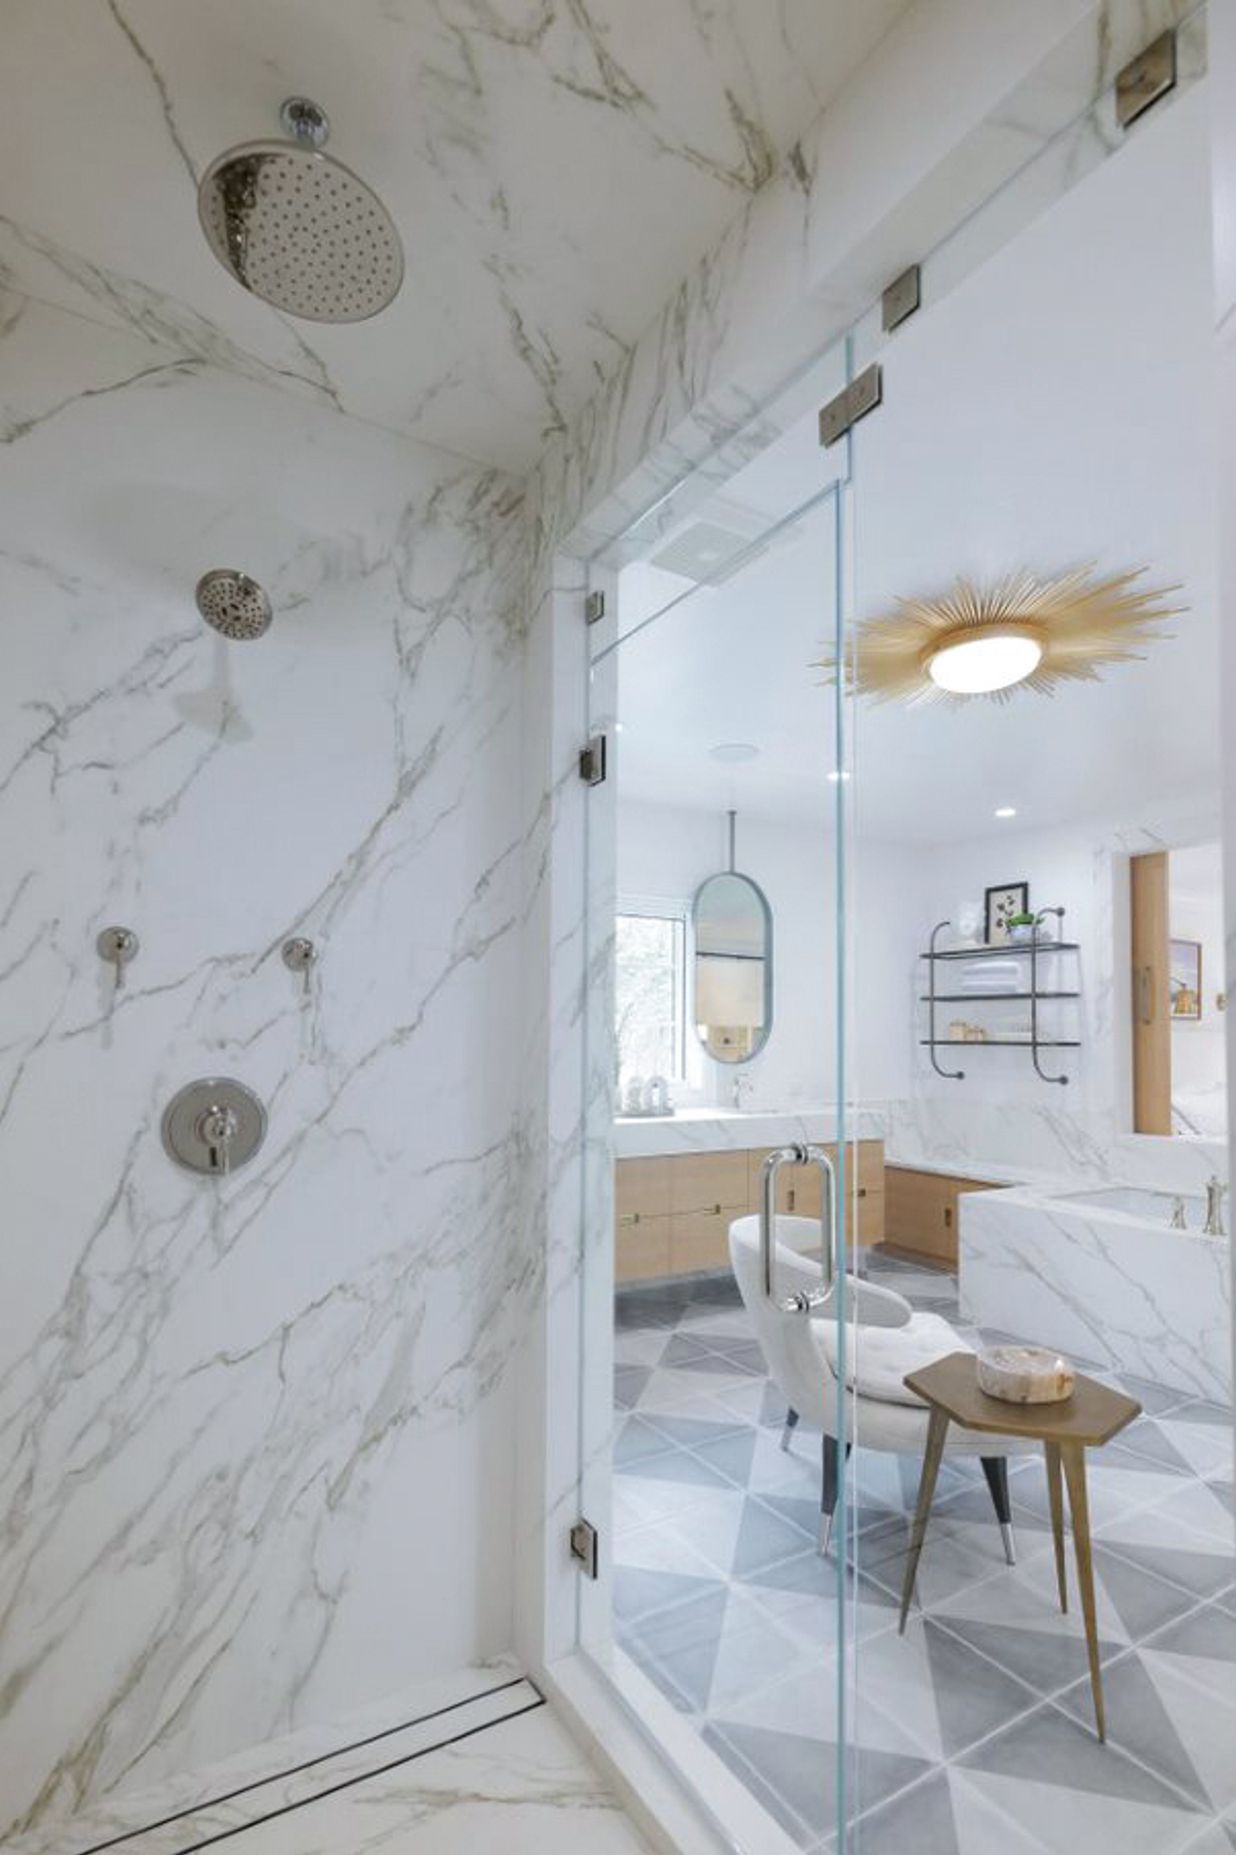 How can you decorate white bathrooms? A few tips you can use